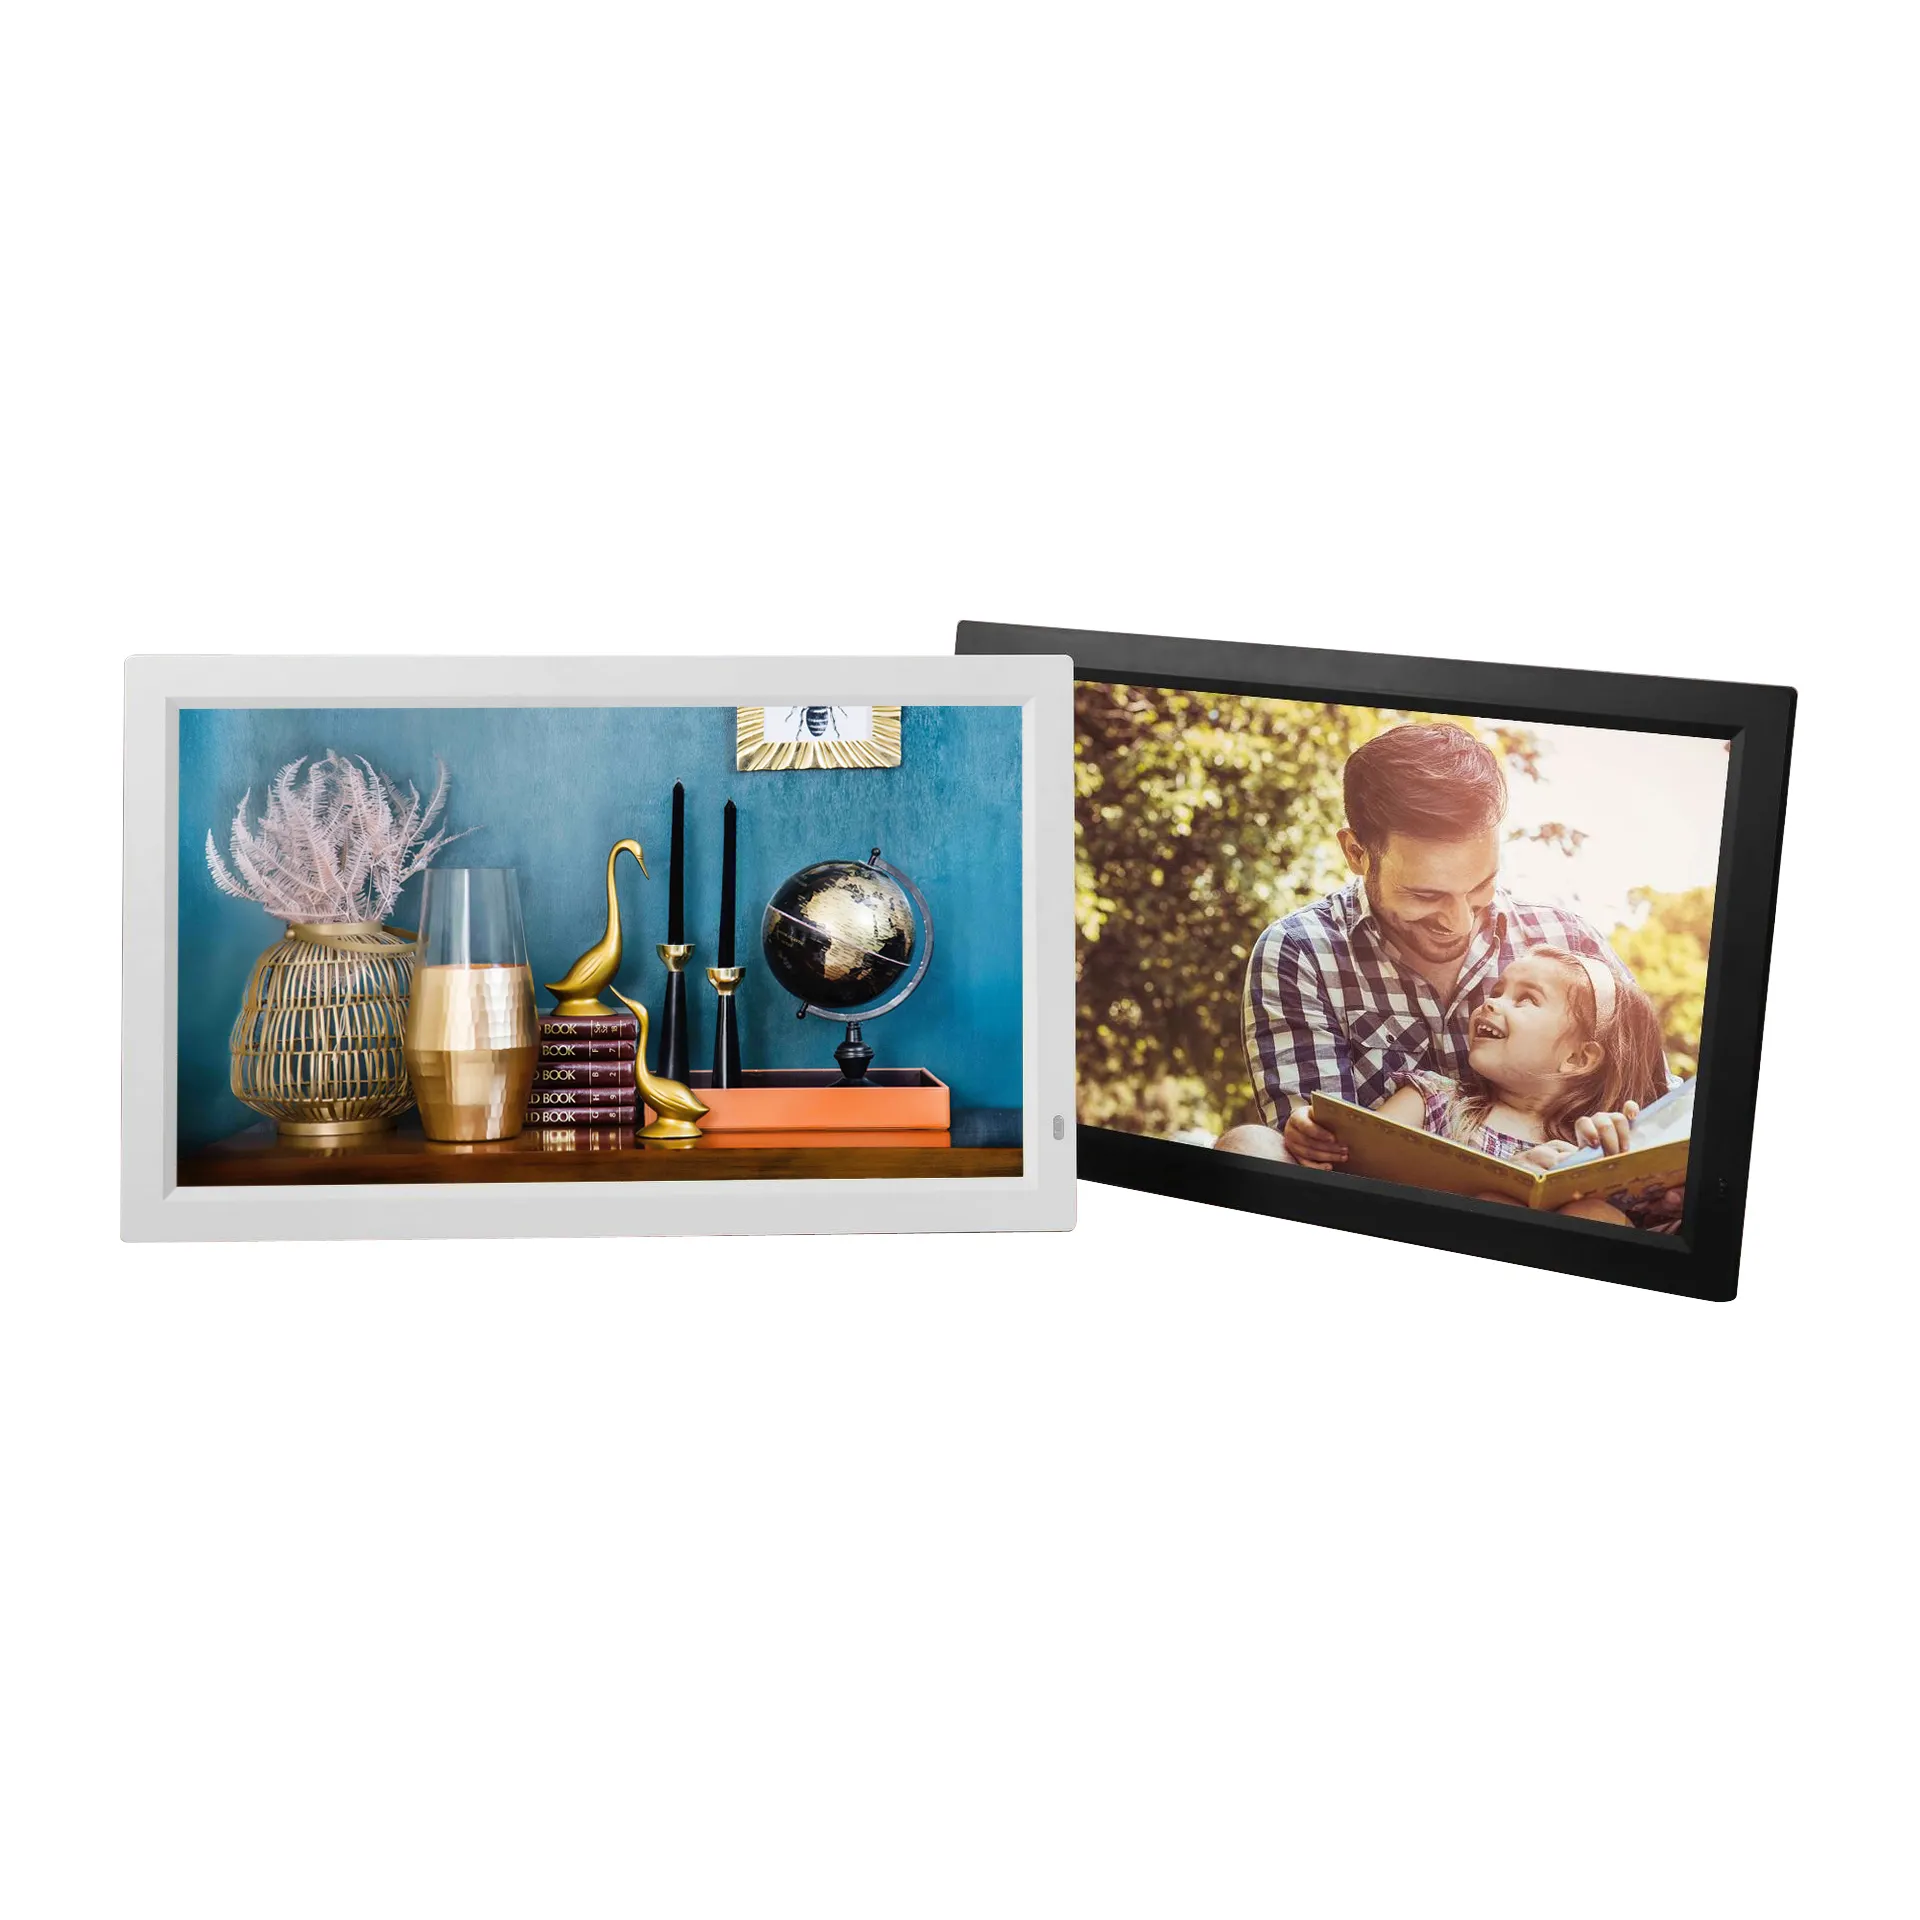 22 inch Wall Mount FHD 1080P LED Digital Photo Frame with photo/music/movie playing